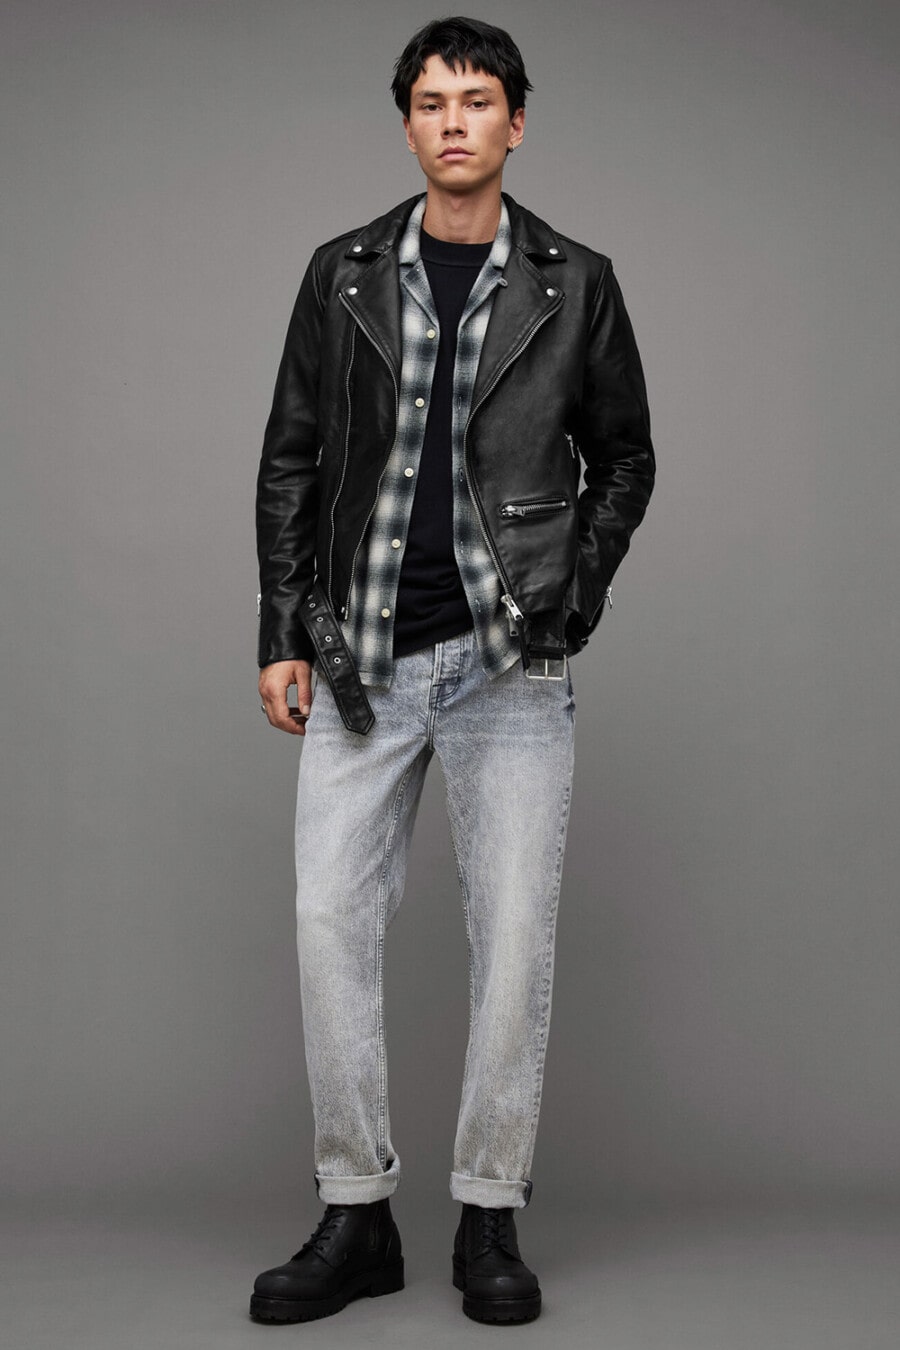 Men's washed grey jeans, black T-shirt, black/white flannel check shirt, black leather biker jacket and black leather boots outfit